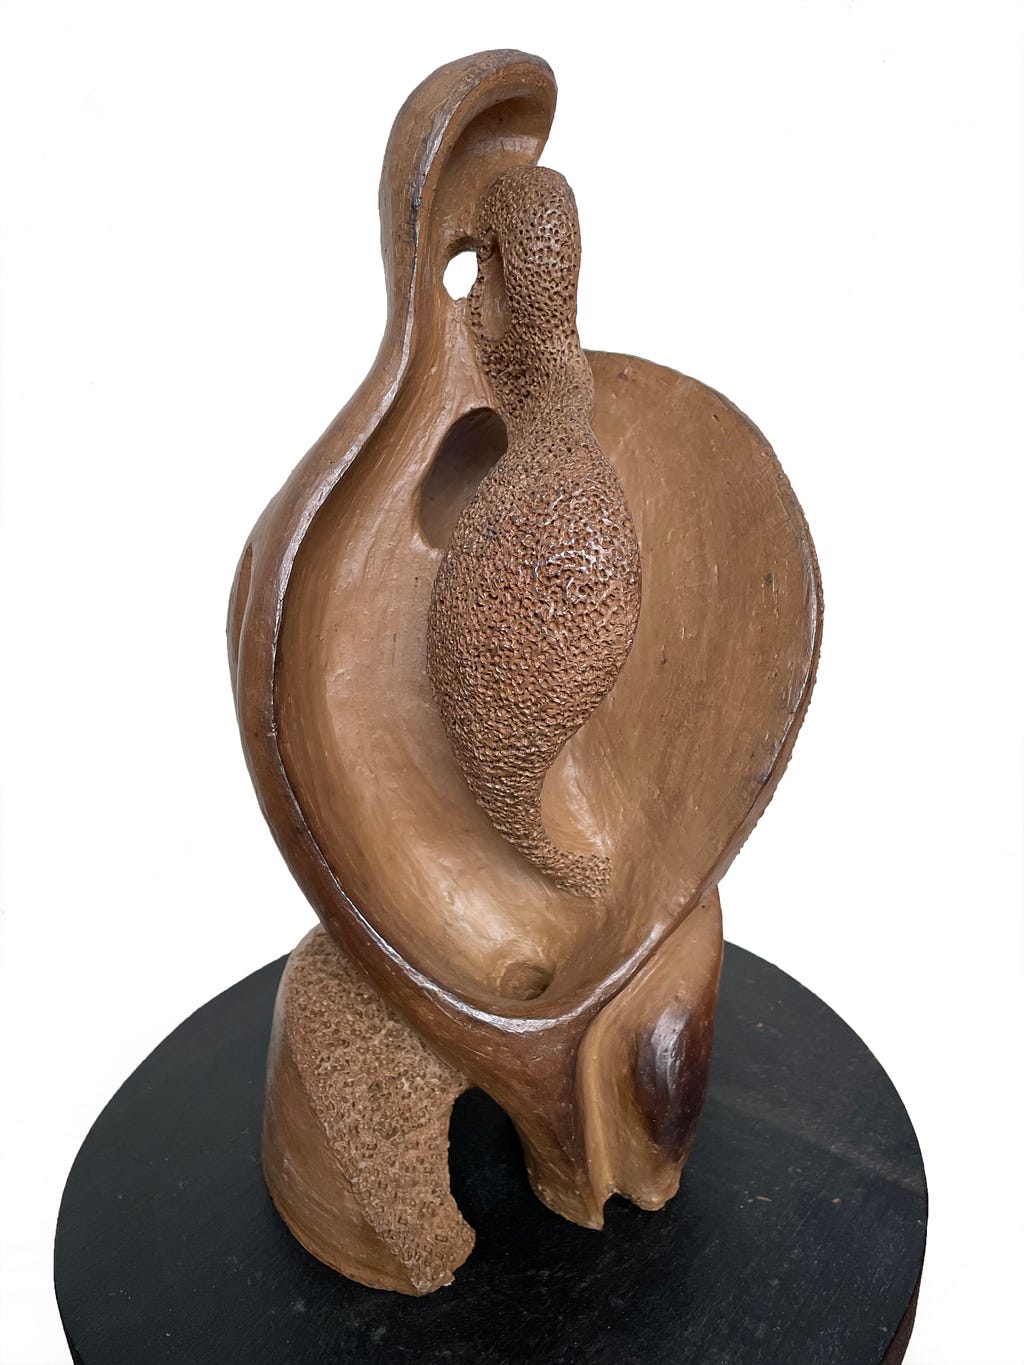 “Reflection of Thoughts” Terracotta Sculpture of Aarti Gupta Bhadauria